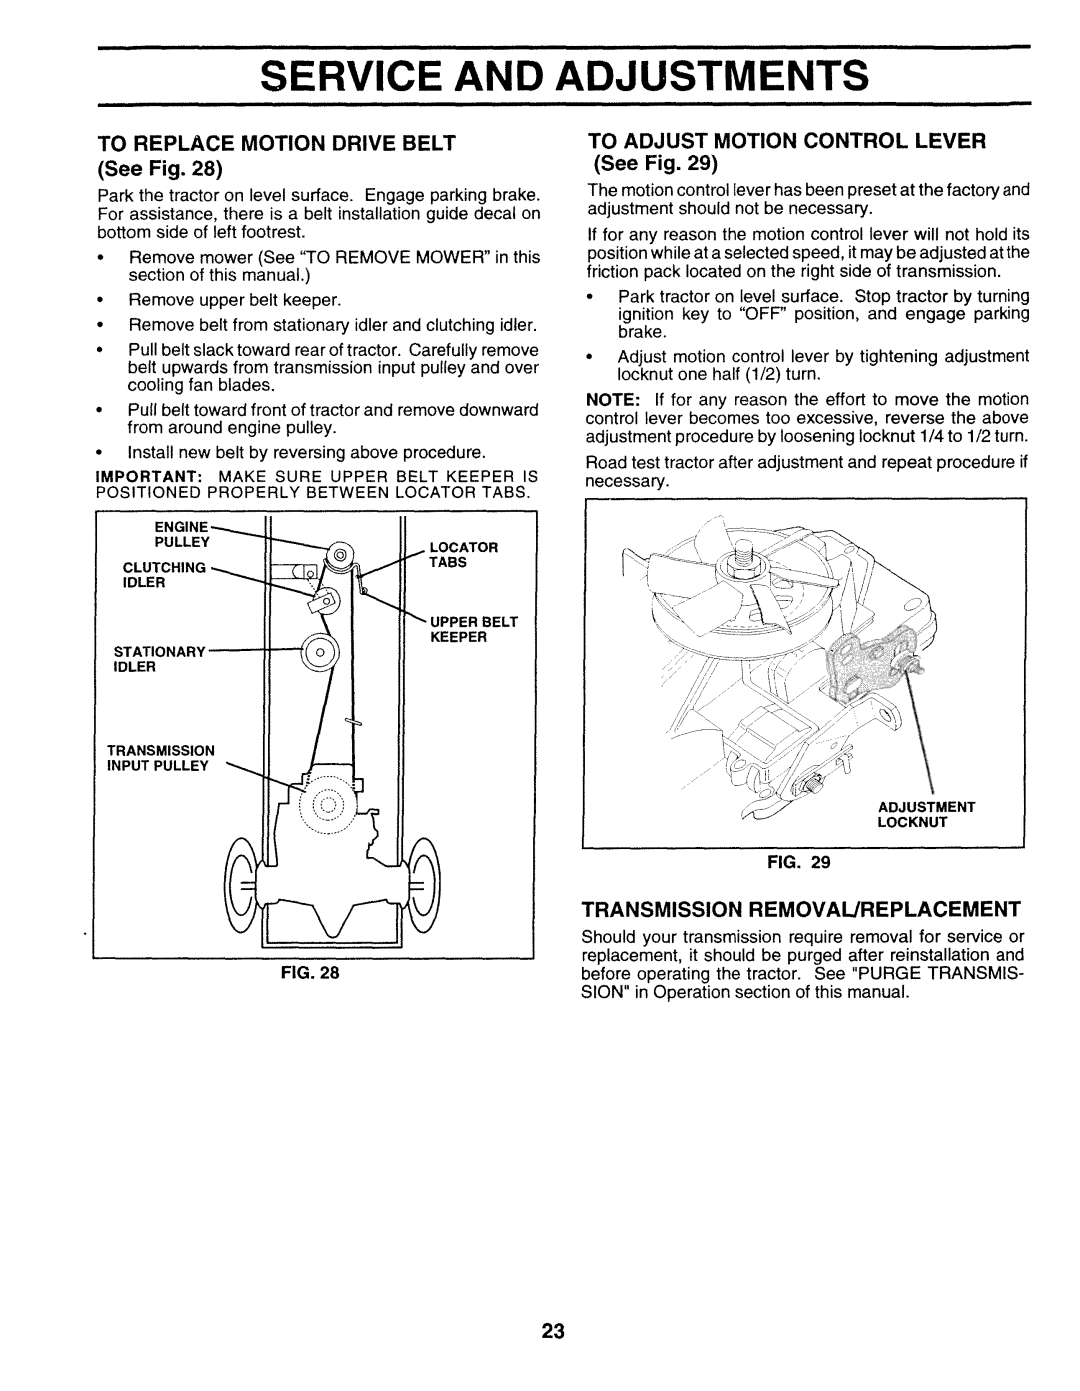 Sears 917.25271 Service, Adjustm, c u c.,NG-iT li, TO REPLACE MOTION DRIVE BELT See Fig, Transmission Removal/Replacement 